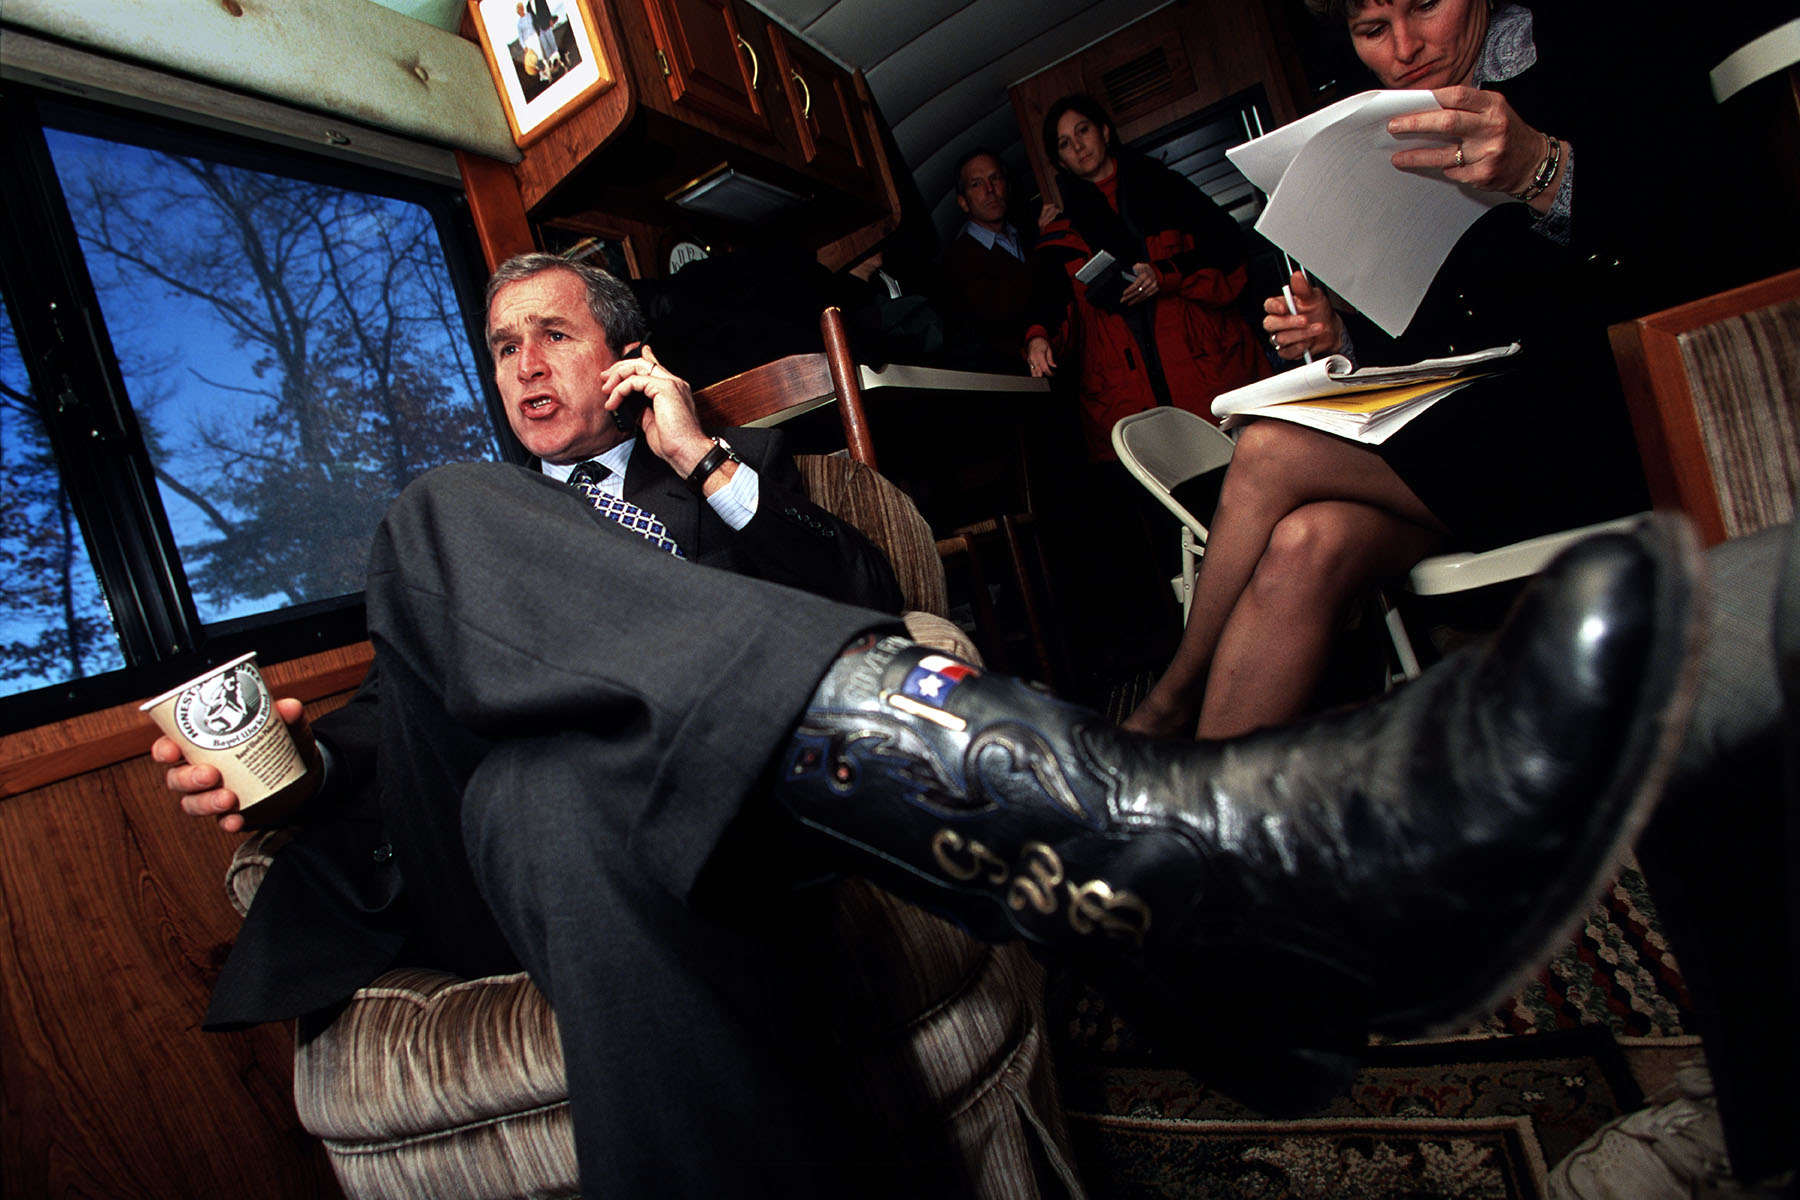 Republican presidential candidate George W Bush on his campaign bus in New Hampshire.